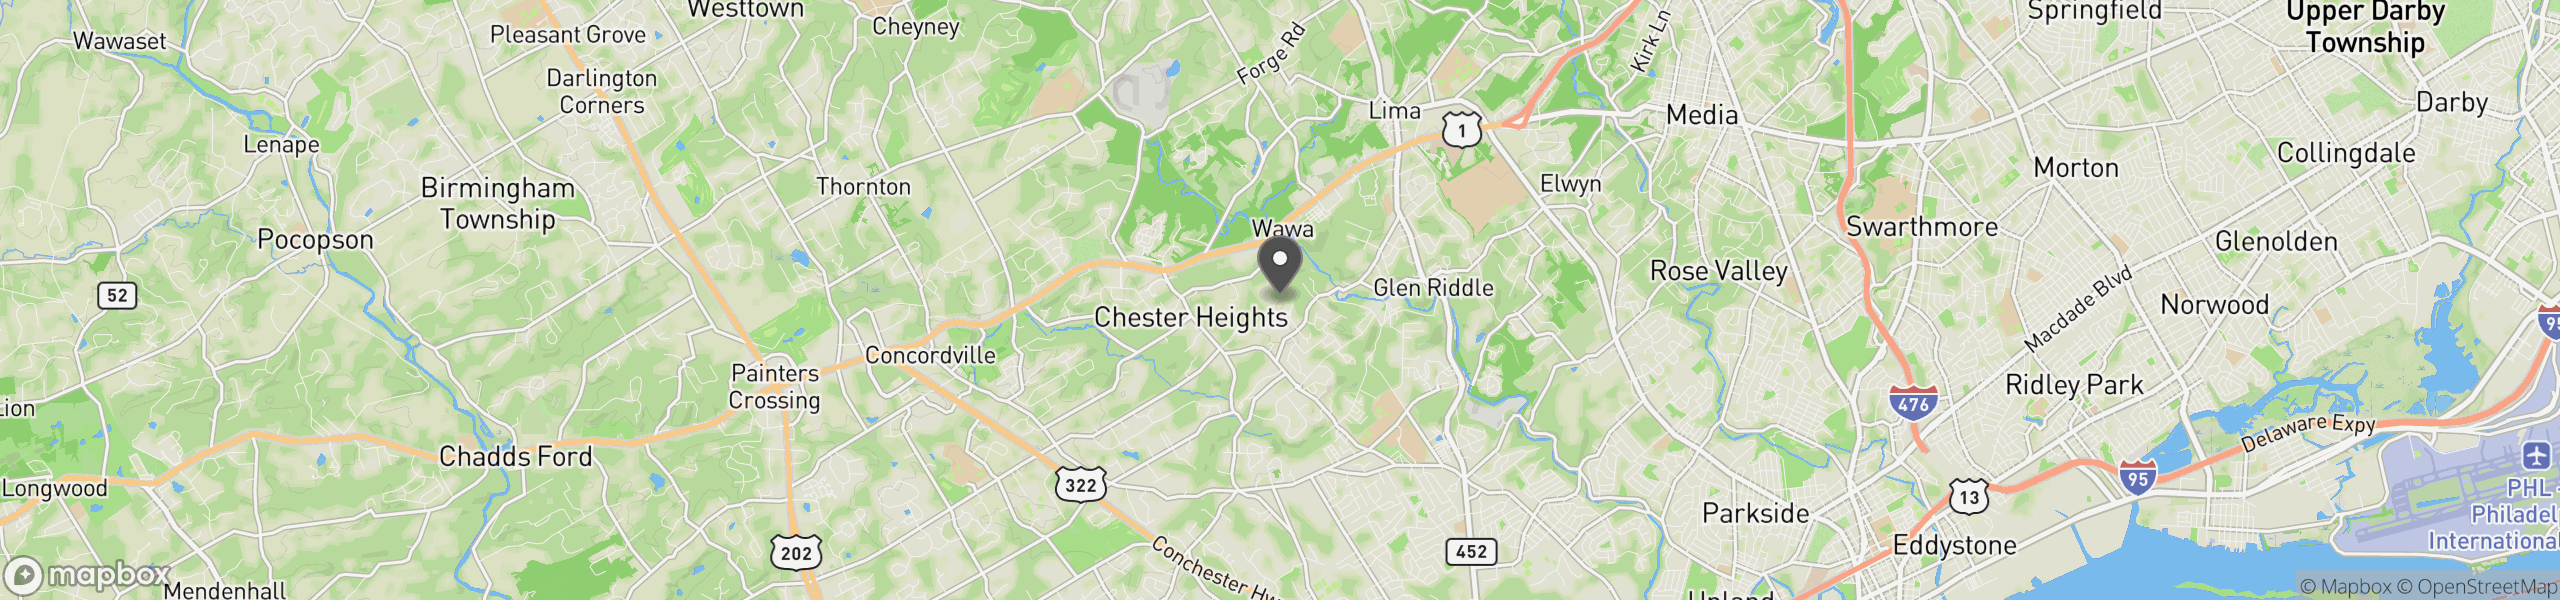 Chester Heights, PA 19017